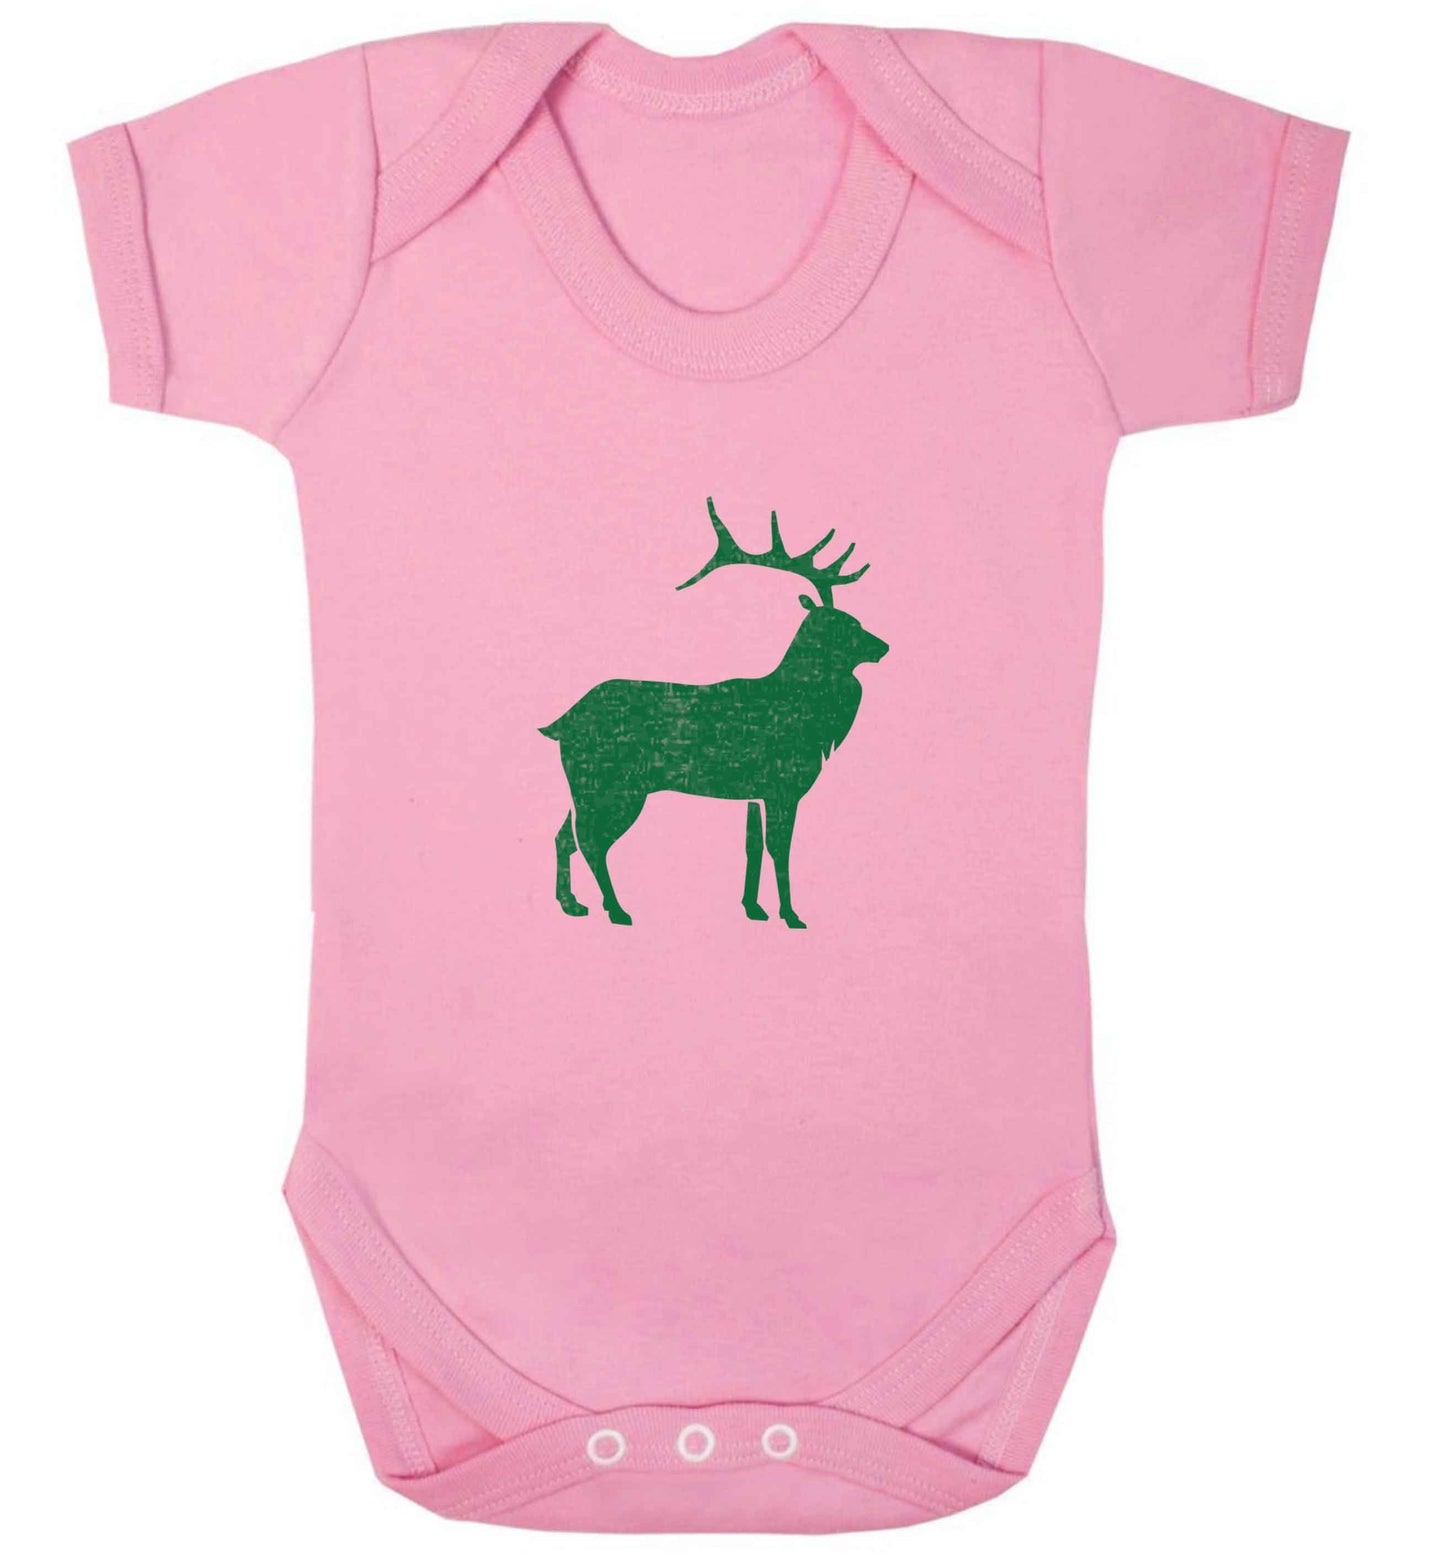 Green stag baby vest pale pink 18-24 months